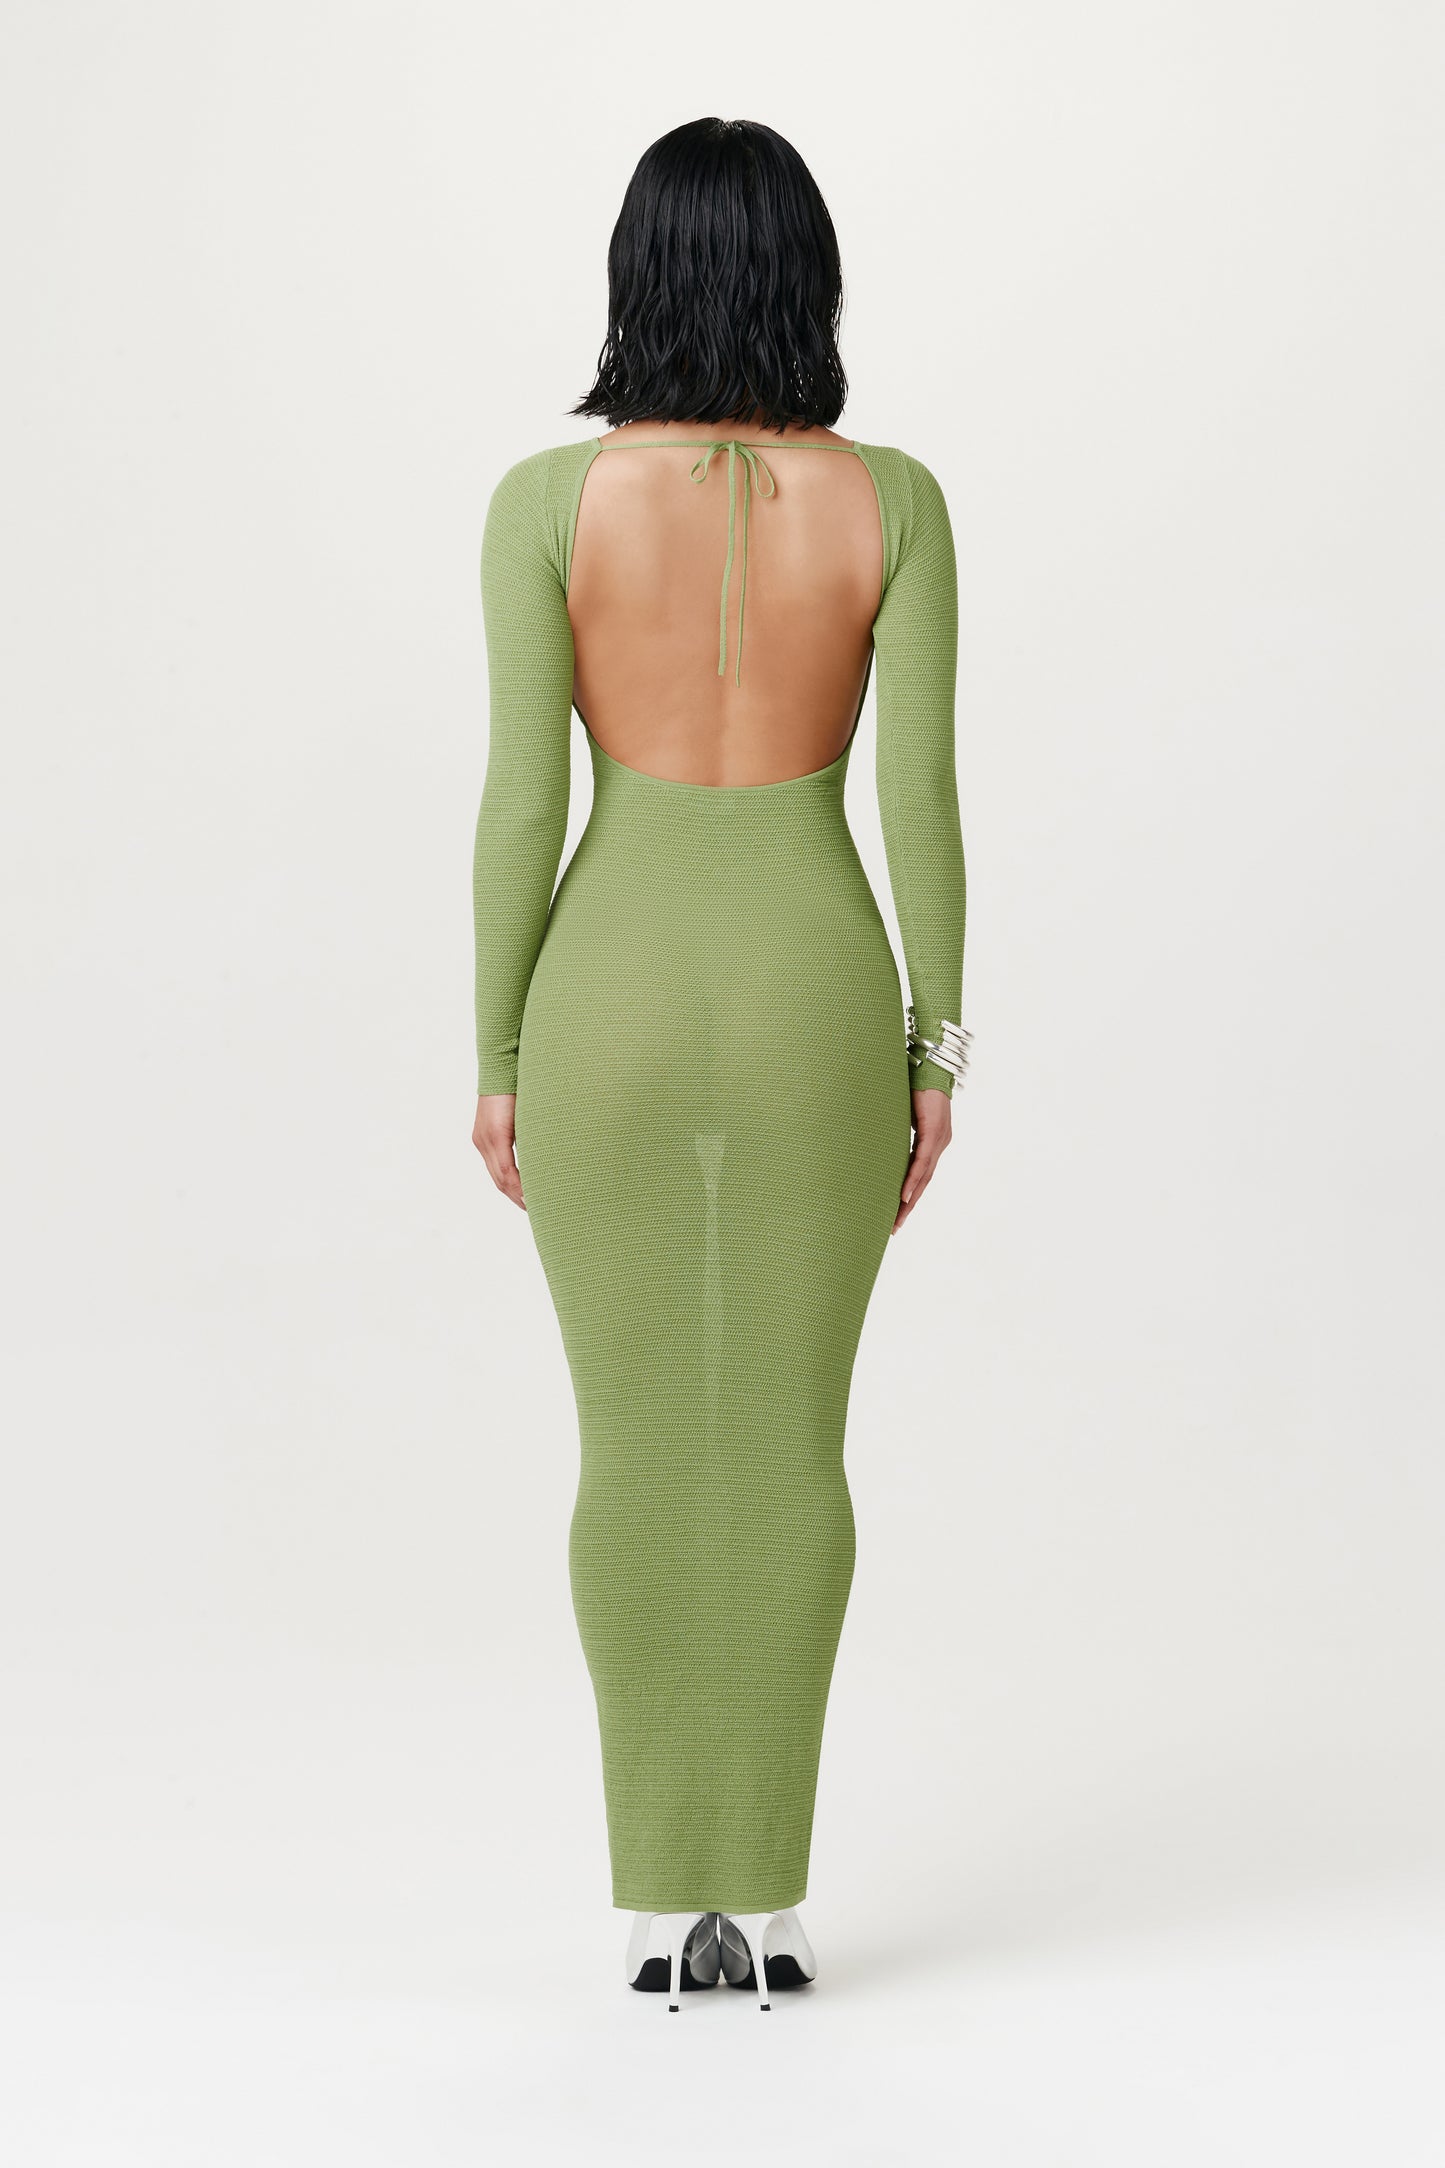 view from behind: woman wearing backless light green maxi dress